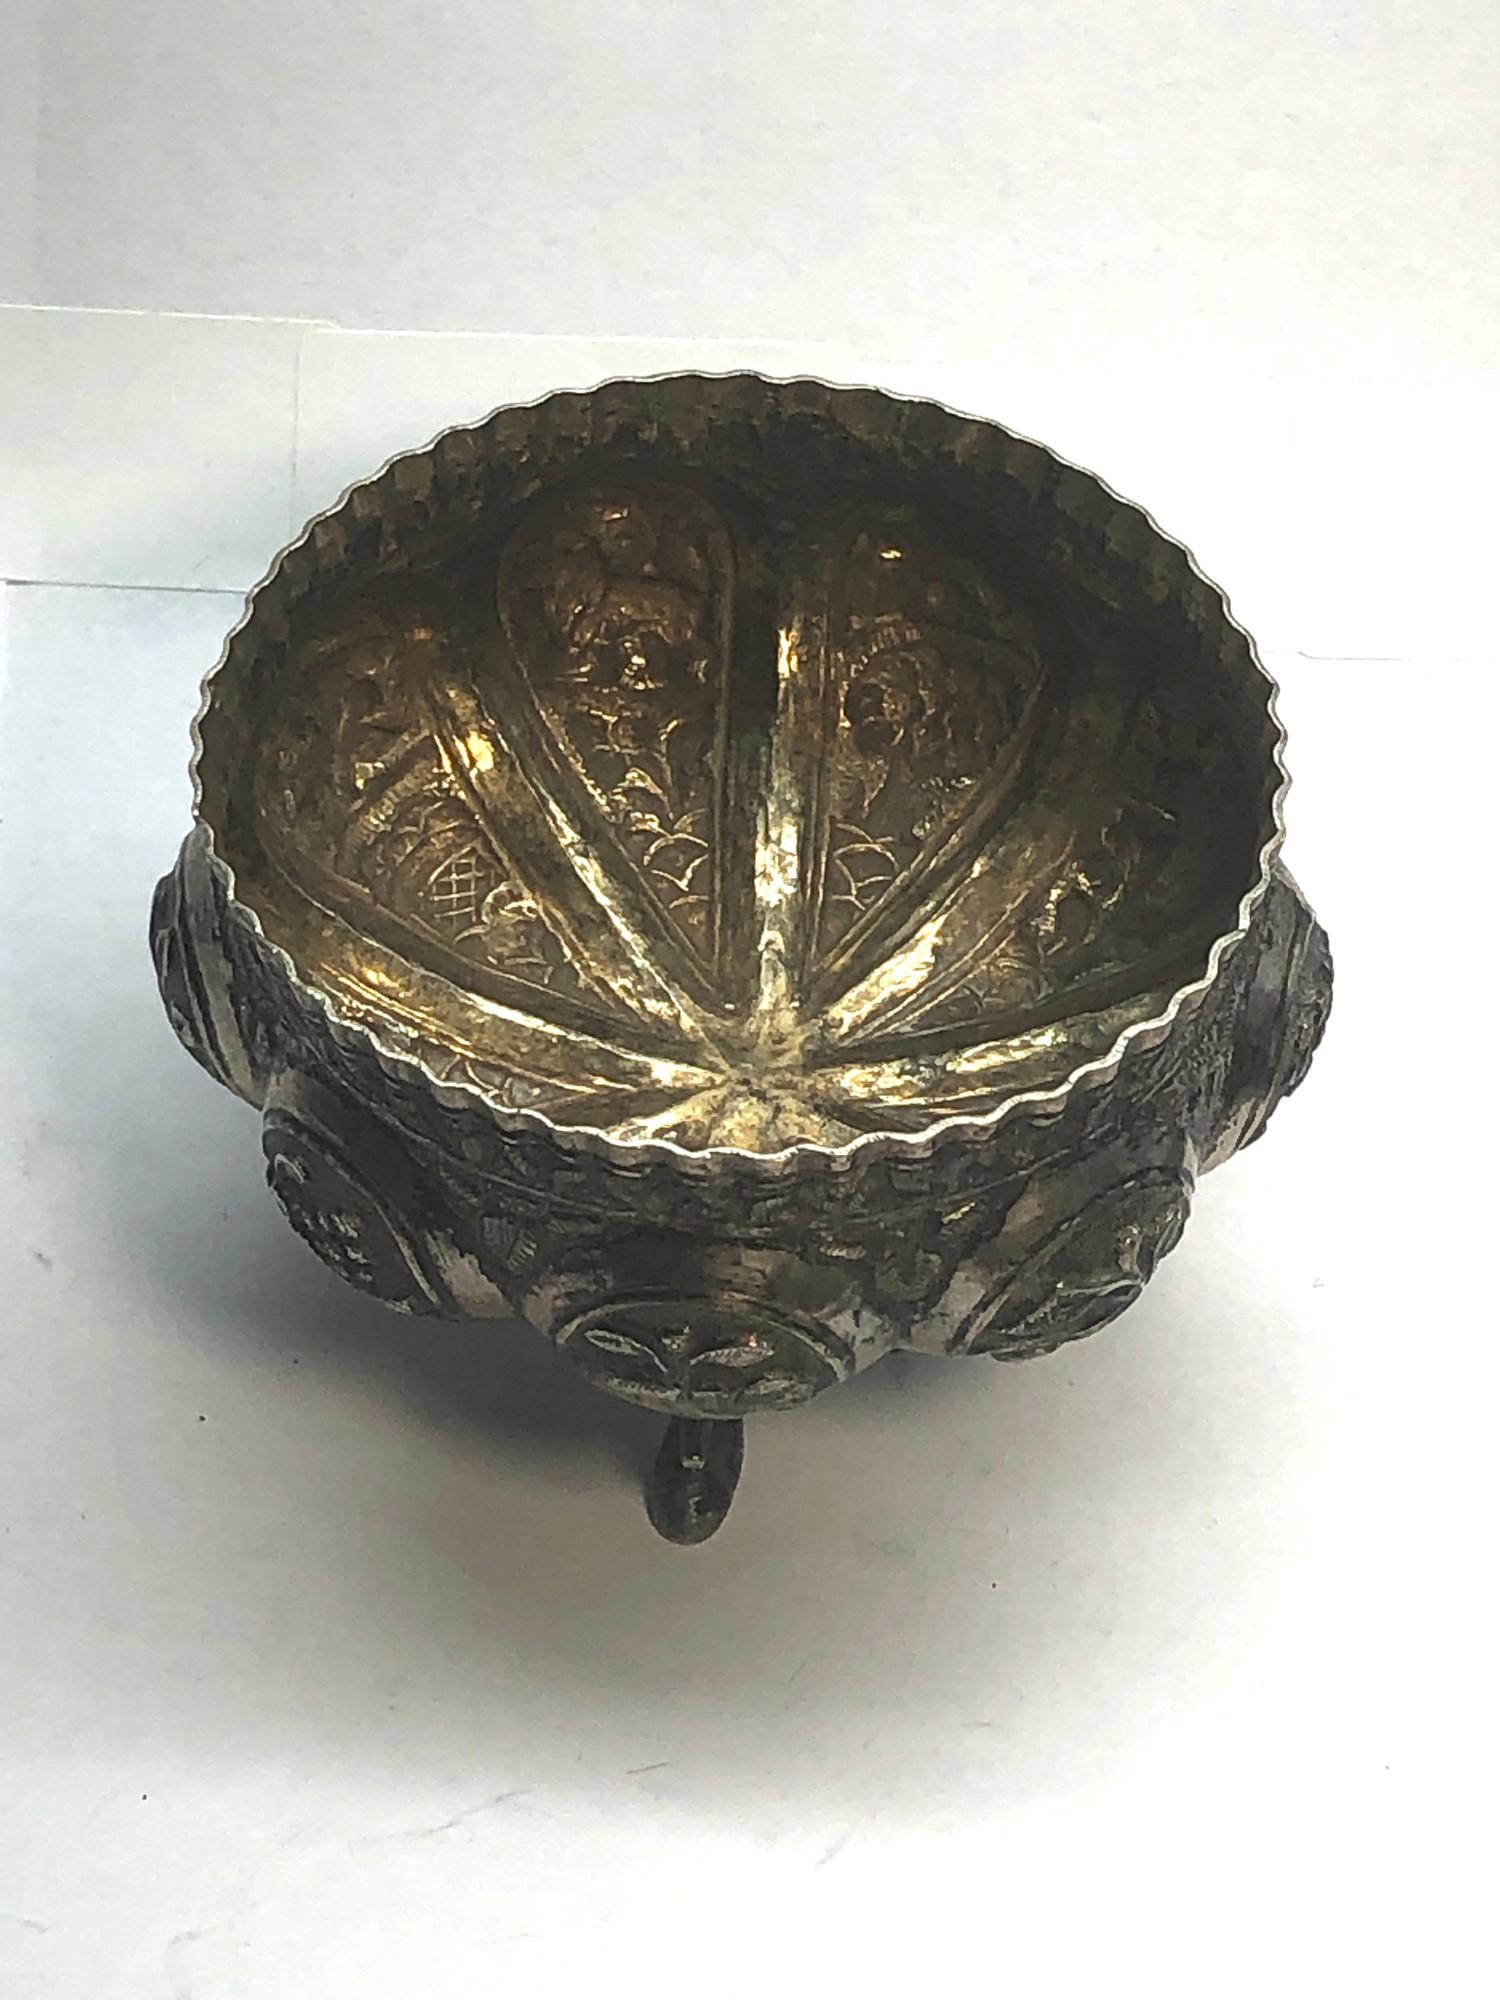 Antique asian embossed silver bowl measures approx 9cm dia height 5cm weight 73g please see images - Image 2 of 3